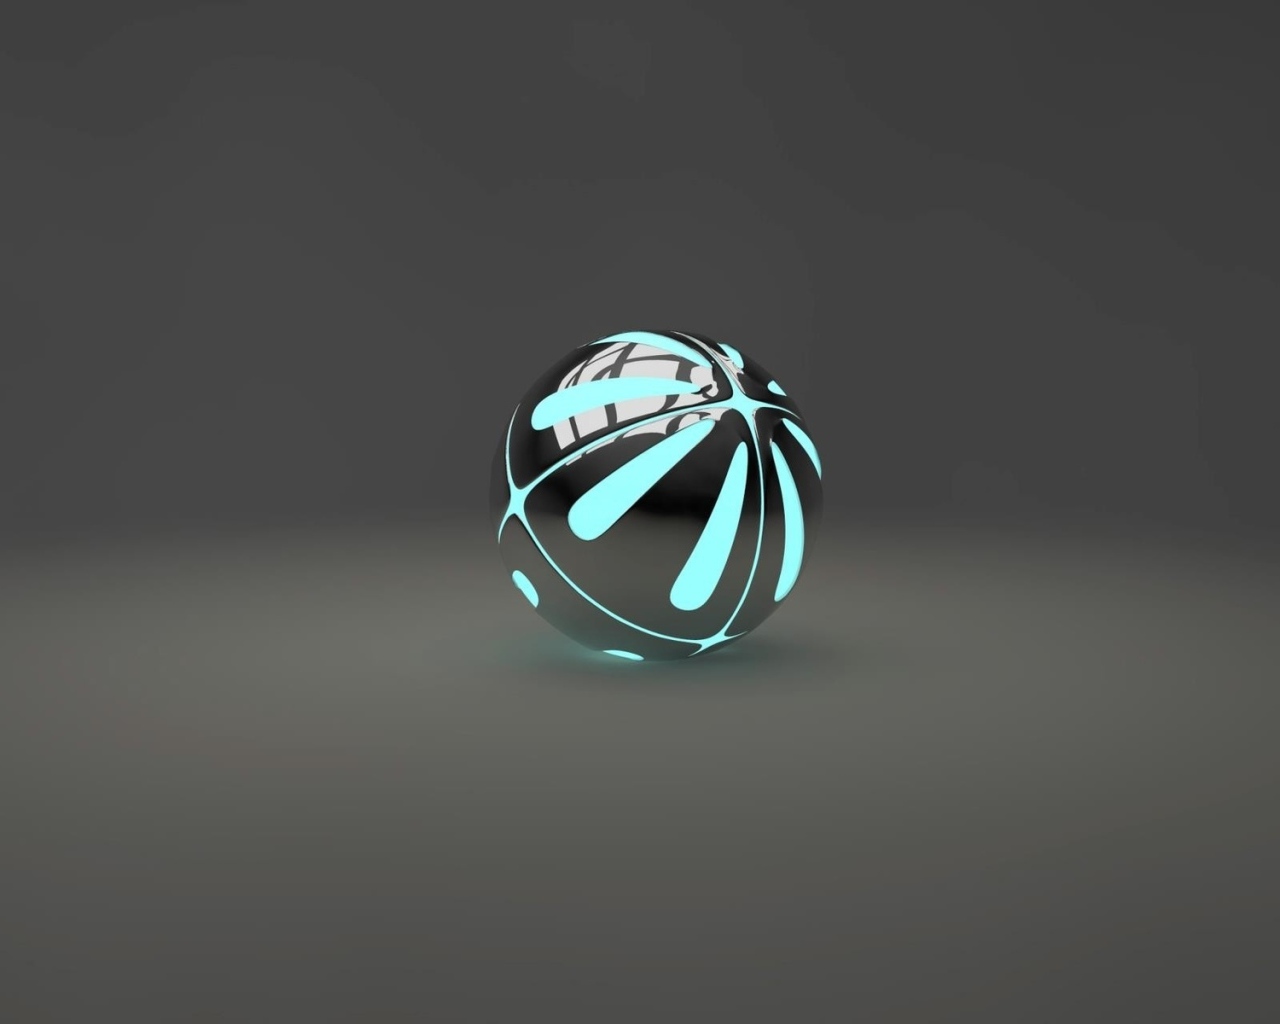 Blue with black ball on gray background